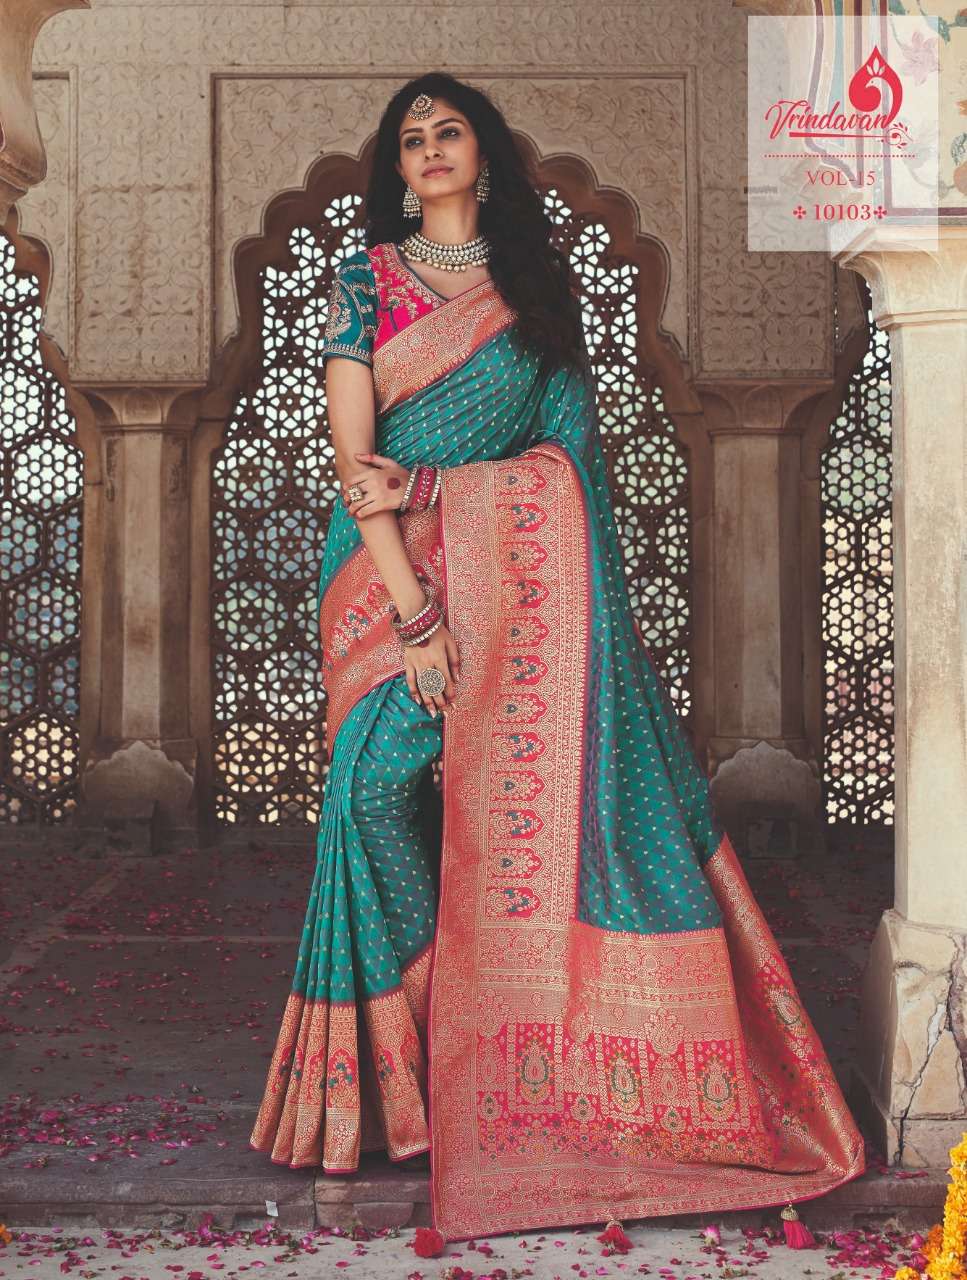 VRINDAVAN VOL-15 BY VRINDAVAN 10103 TO 10117 SERIES INDIAN TRADITIONAL WEAR COLLECTION BEAUTIFUL STYLISH FANCY COLORFUL PARTY WEAR & OCCASIONAL WEAR SILK SAREES AT WHOLESALE PRICE